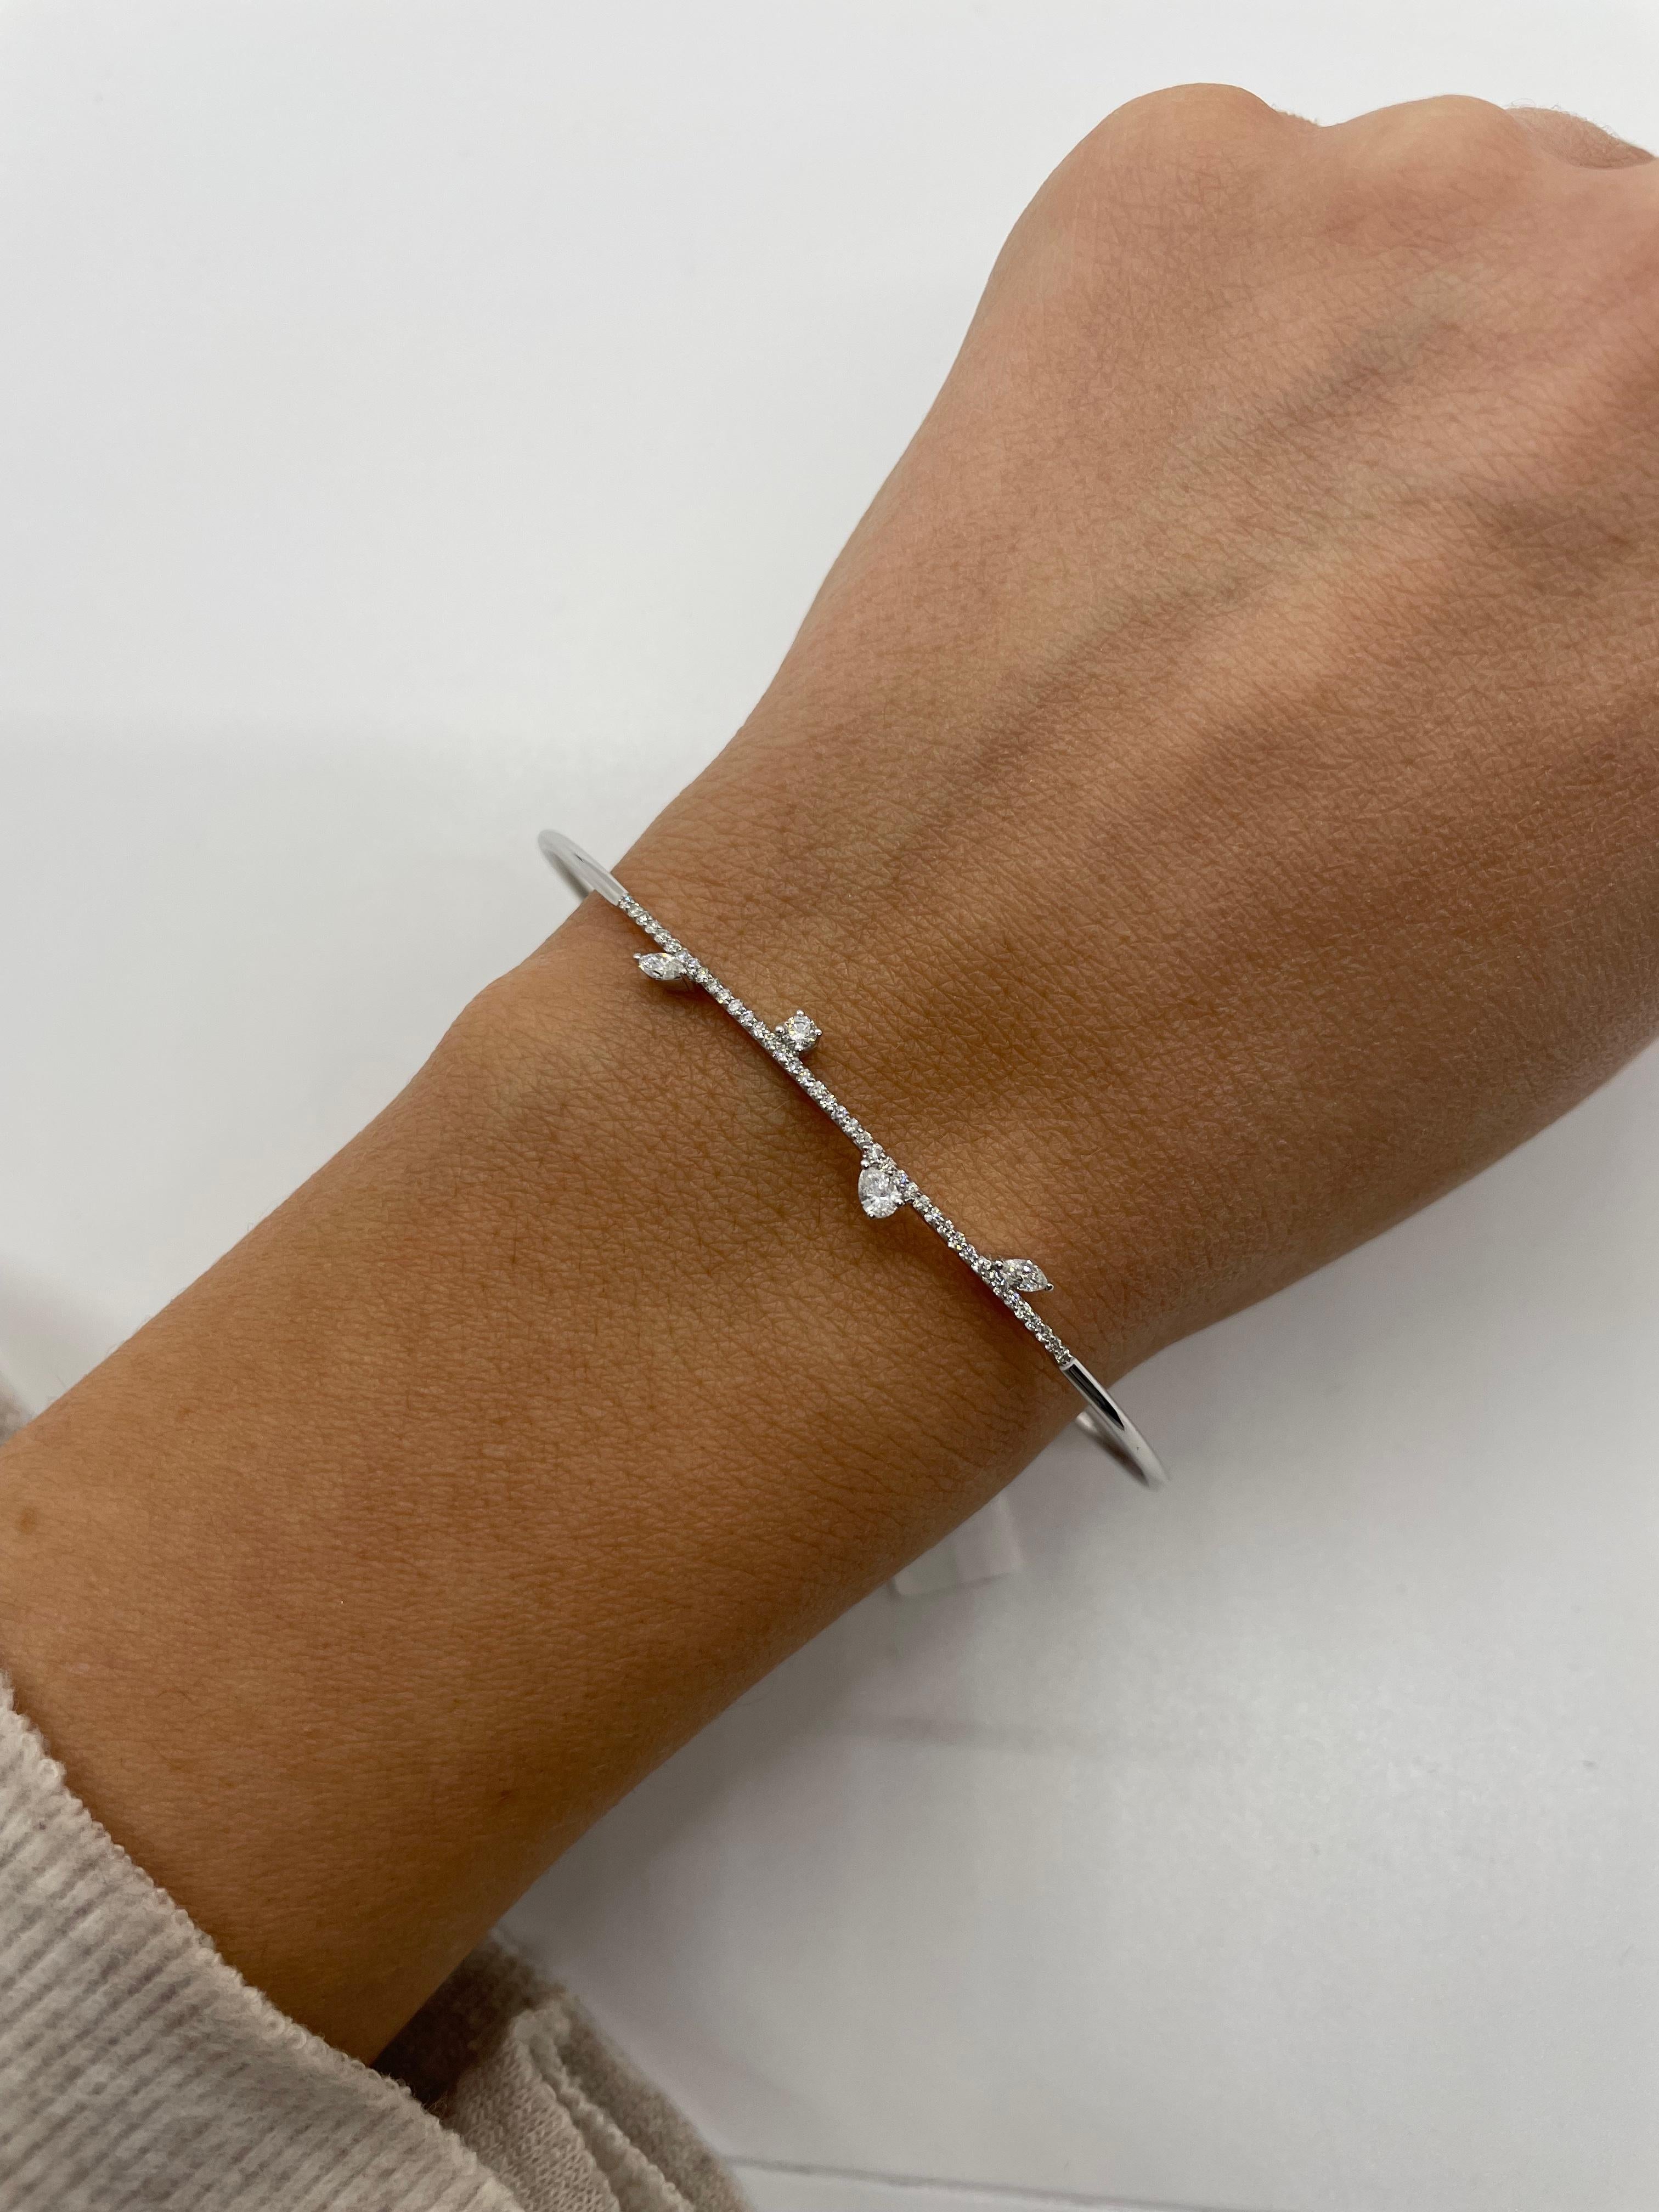 Linear Diamond Cuff Bracelet in 18K White Gold - Medium

0.33 Cts of Diamonds, G-H Color, VS-SI Clarity
5.3 Grams of 18K White Gold
Available in other size options: Small, large

No two products are exactly same, therefore weights are approximate.